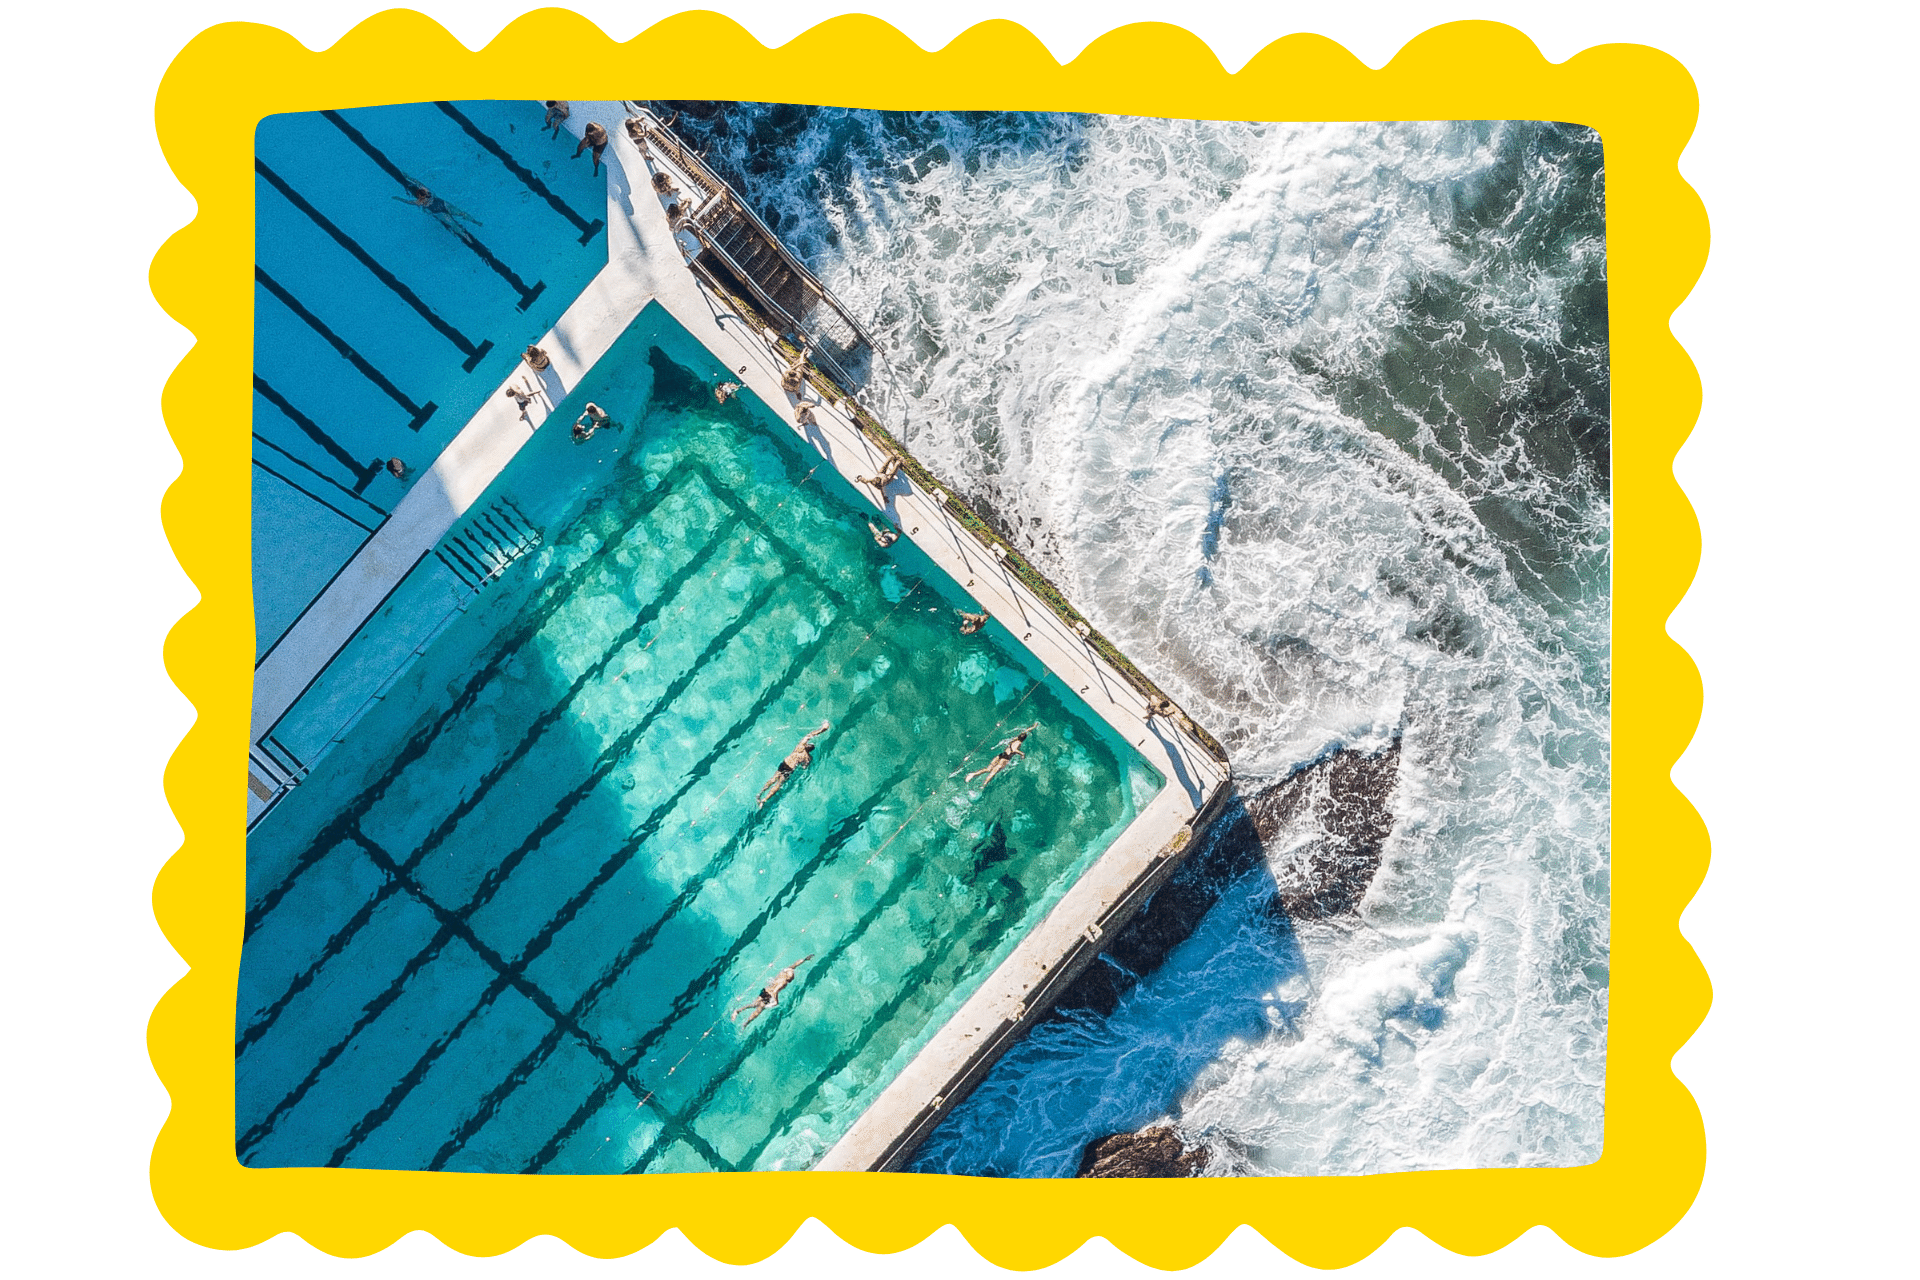 The swimming pool at Bondi Icebergs as seen from above. Waves crash around the pool, protected by its barriers.